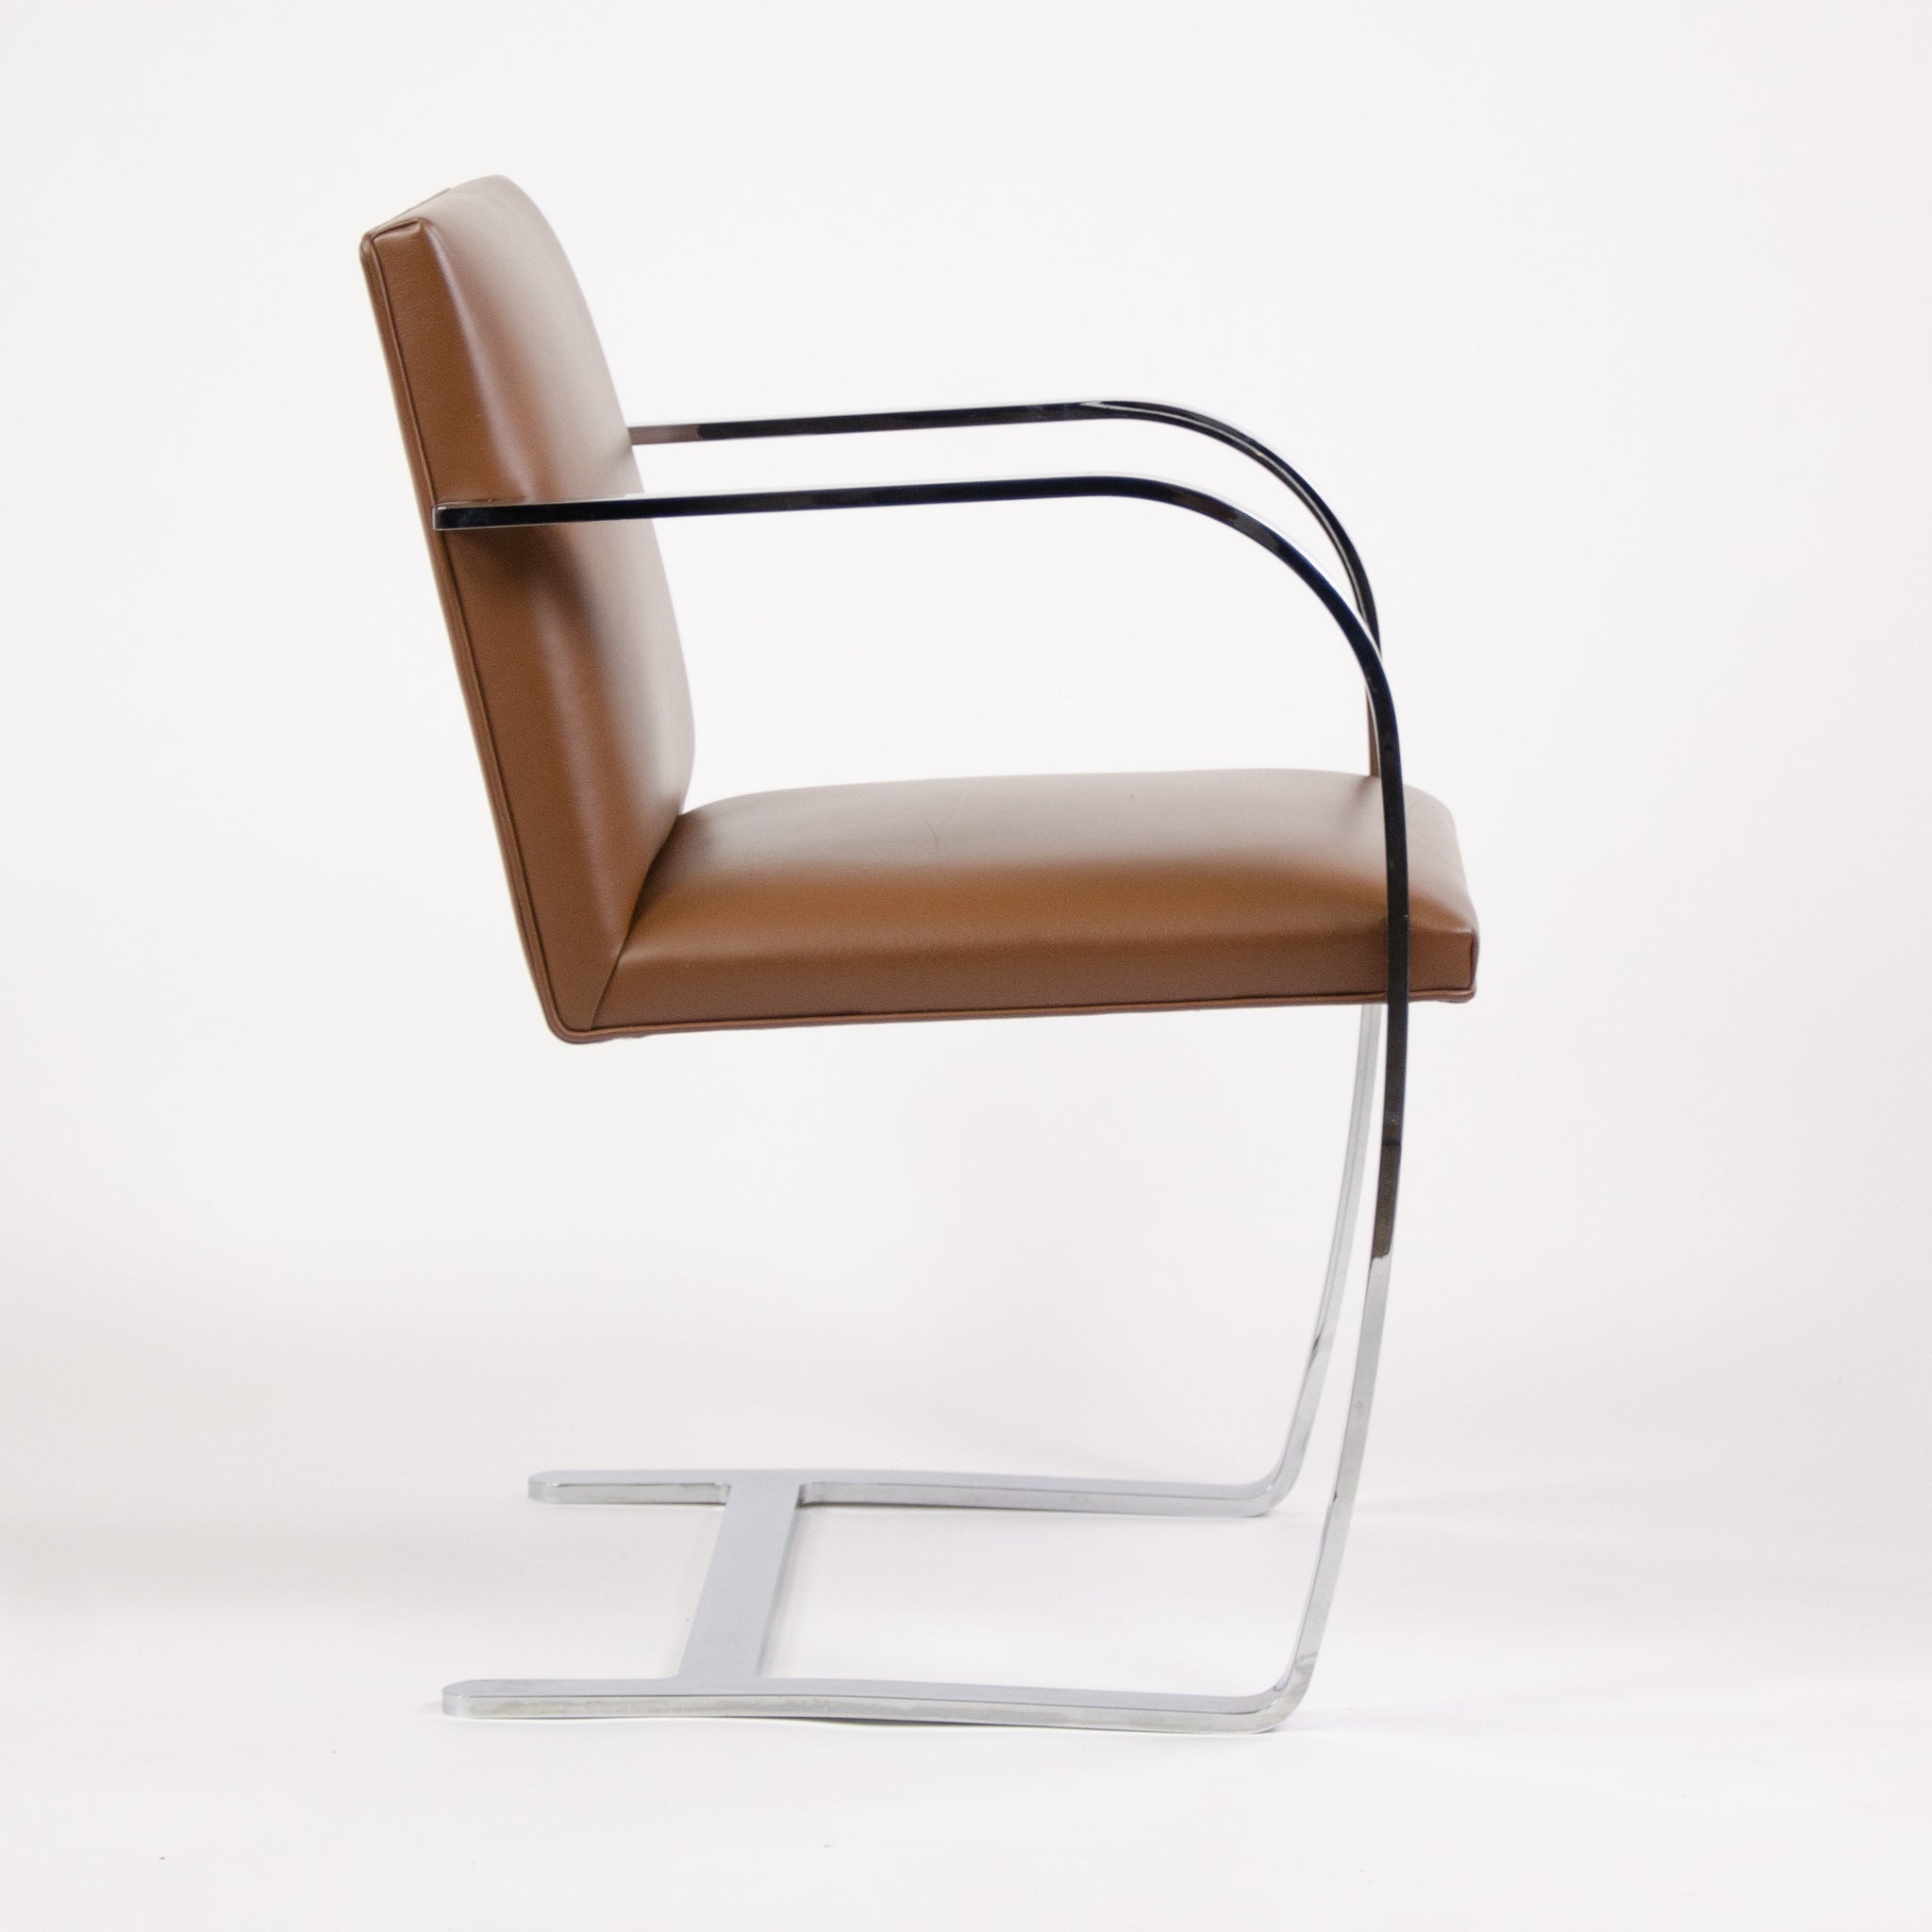 SOLD Knoll Mies Van Der Rohe Brno Chairs Brown Leather 3x Available